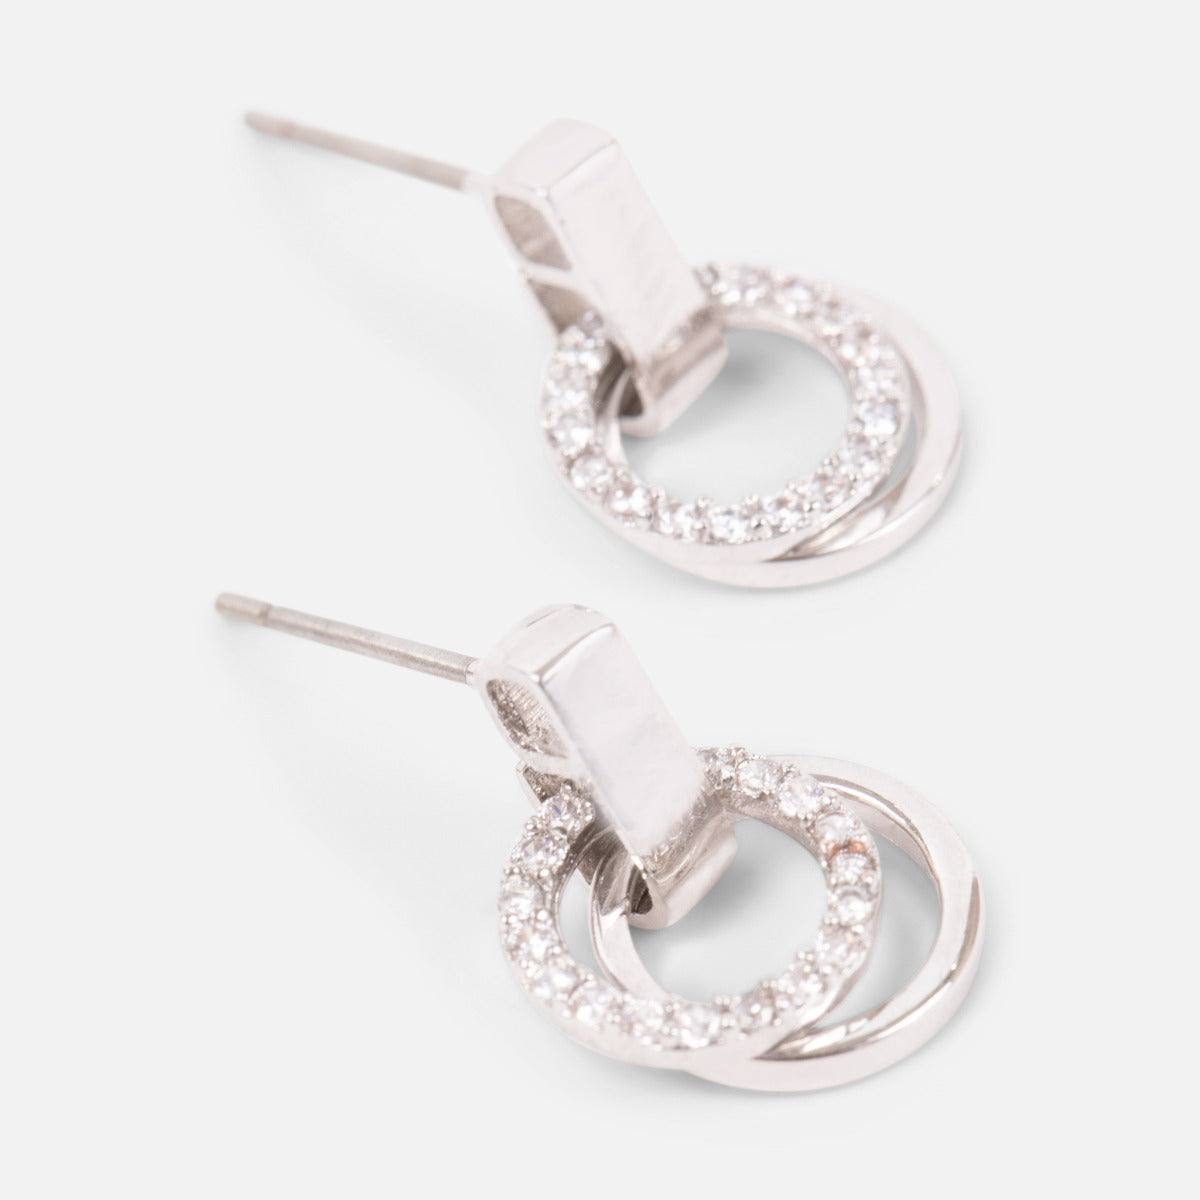 Double circle earrings with cubic zirconia stones   